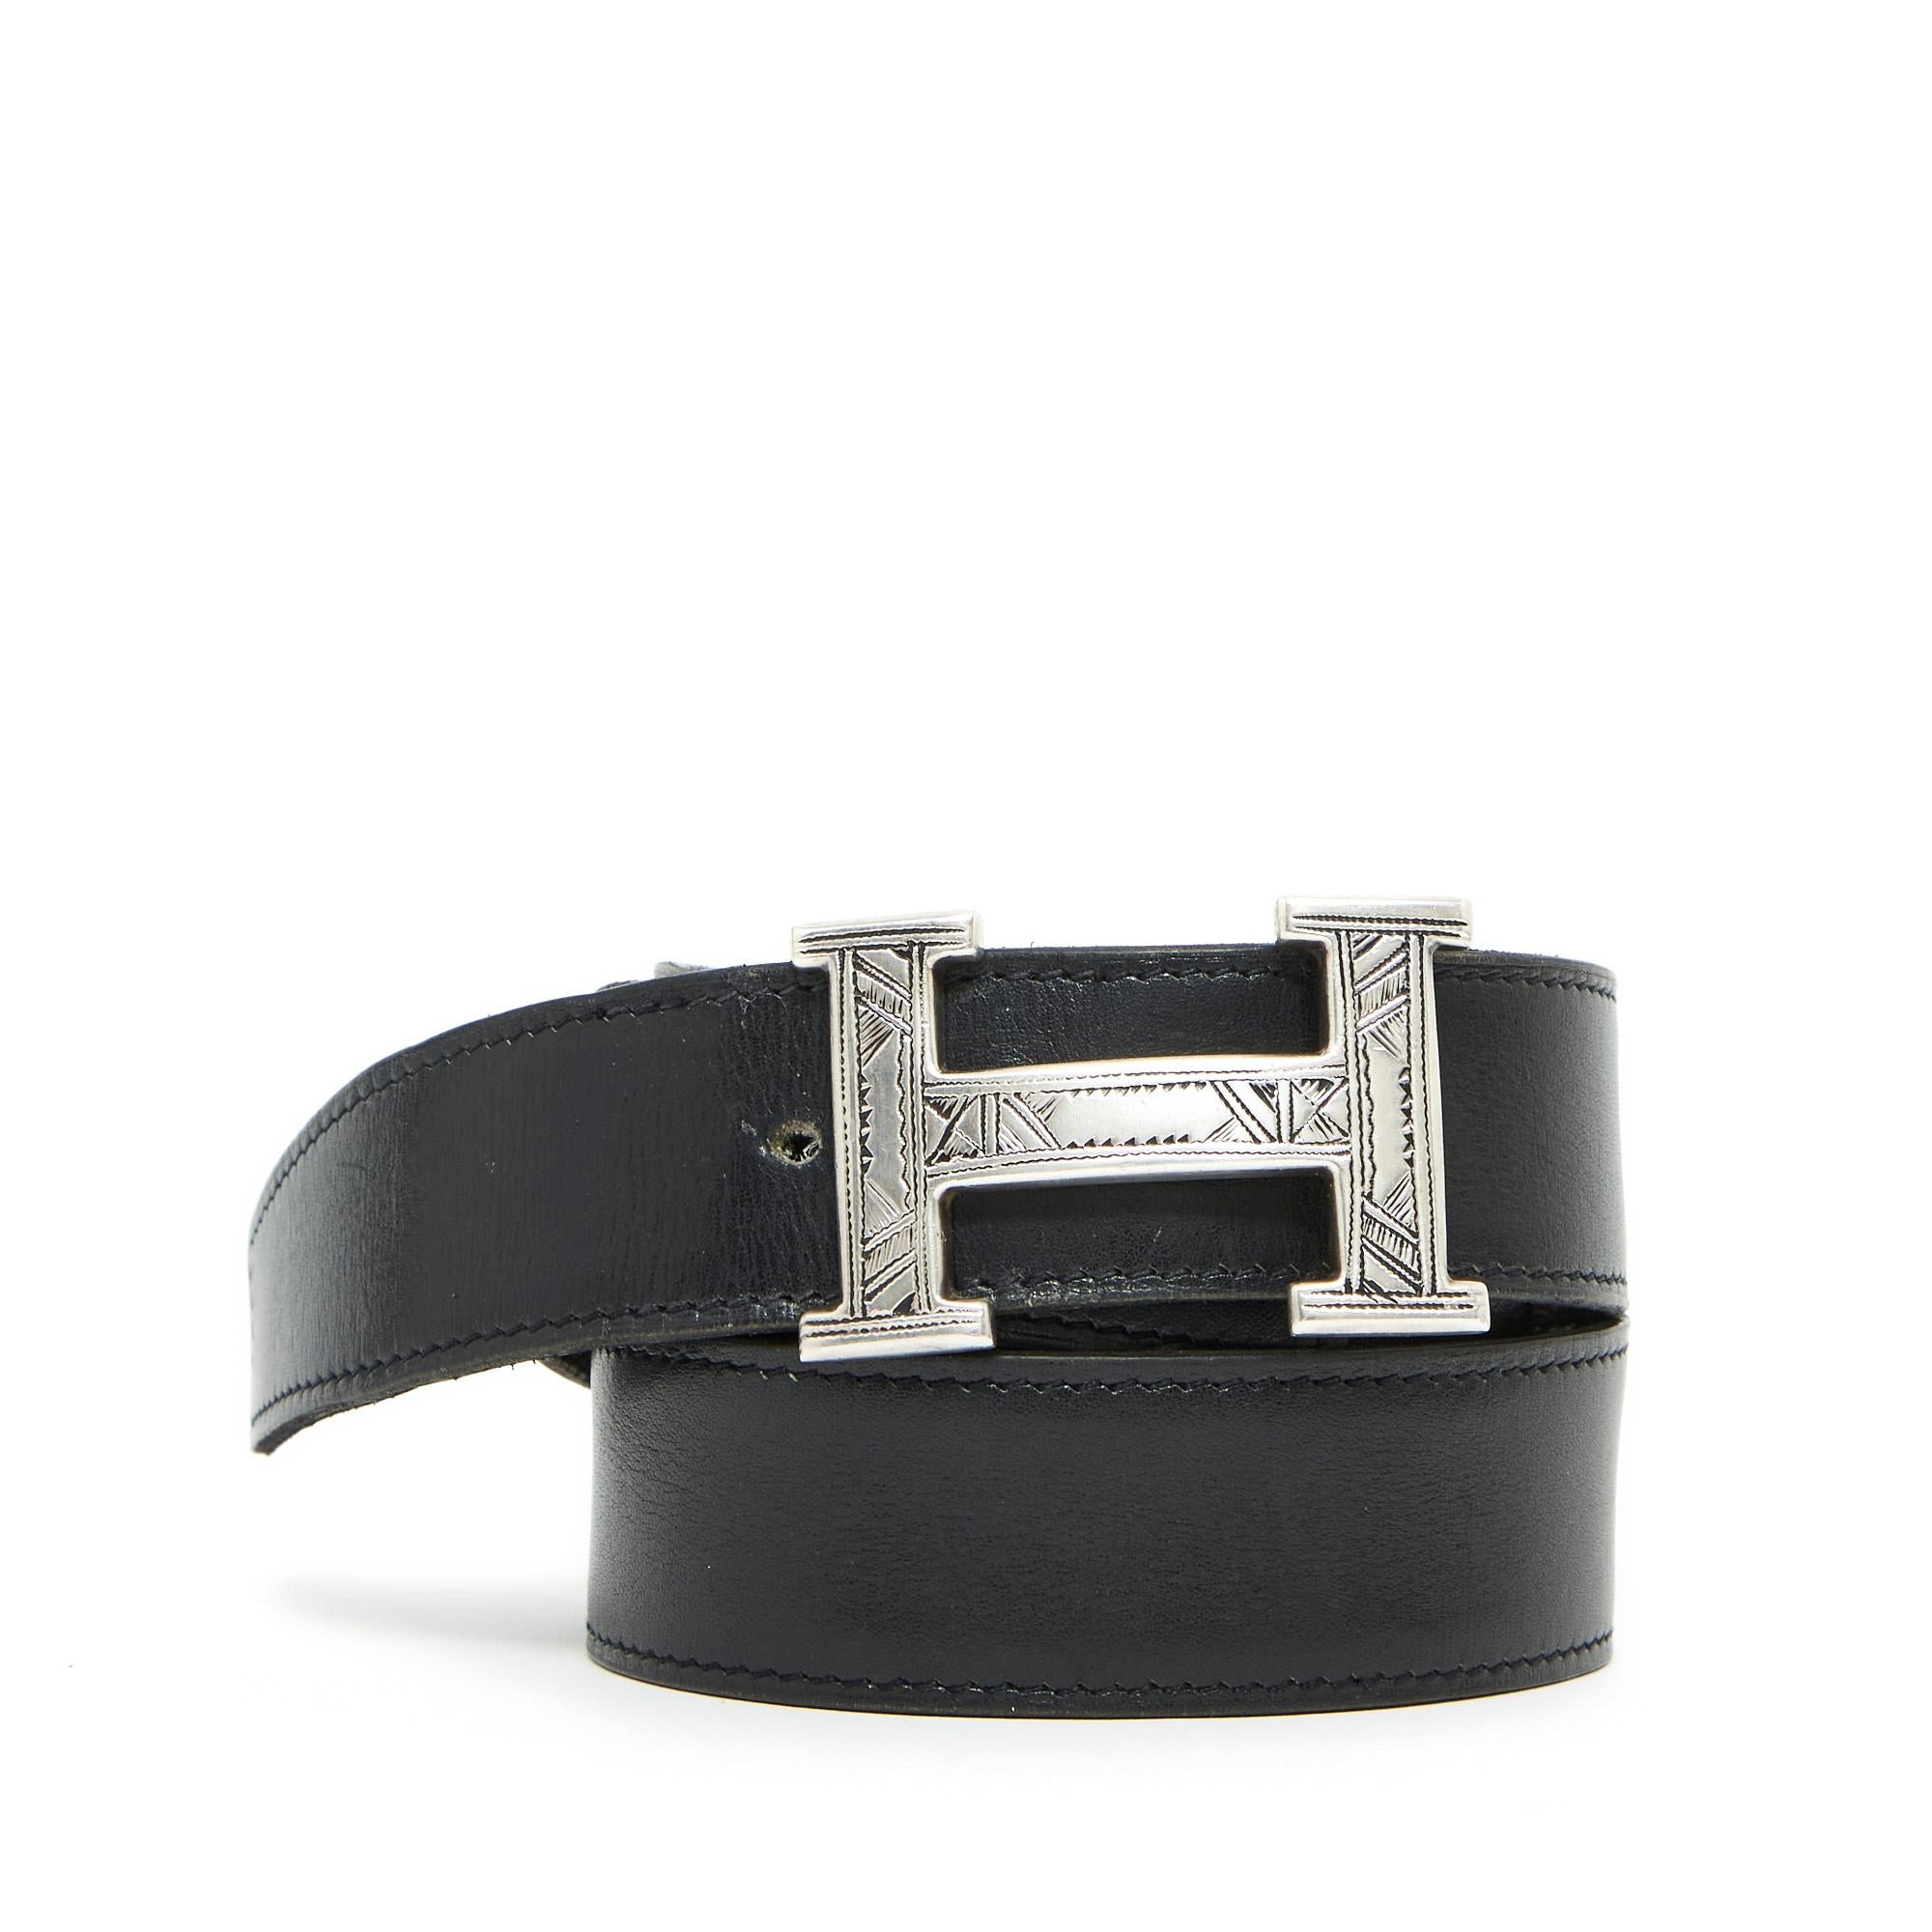 Hermès A series belt composed of a reversible leather link in black box leather and almost black brown grained leather, dated 2007, and an H or Constance buckle in solid silver decorated with Tuareg motifs, made by hand, and therefore unique. Link